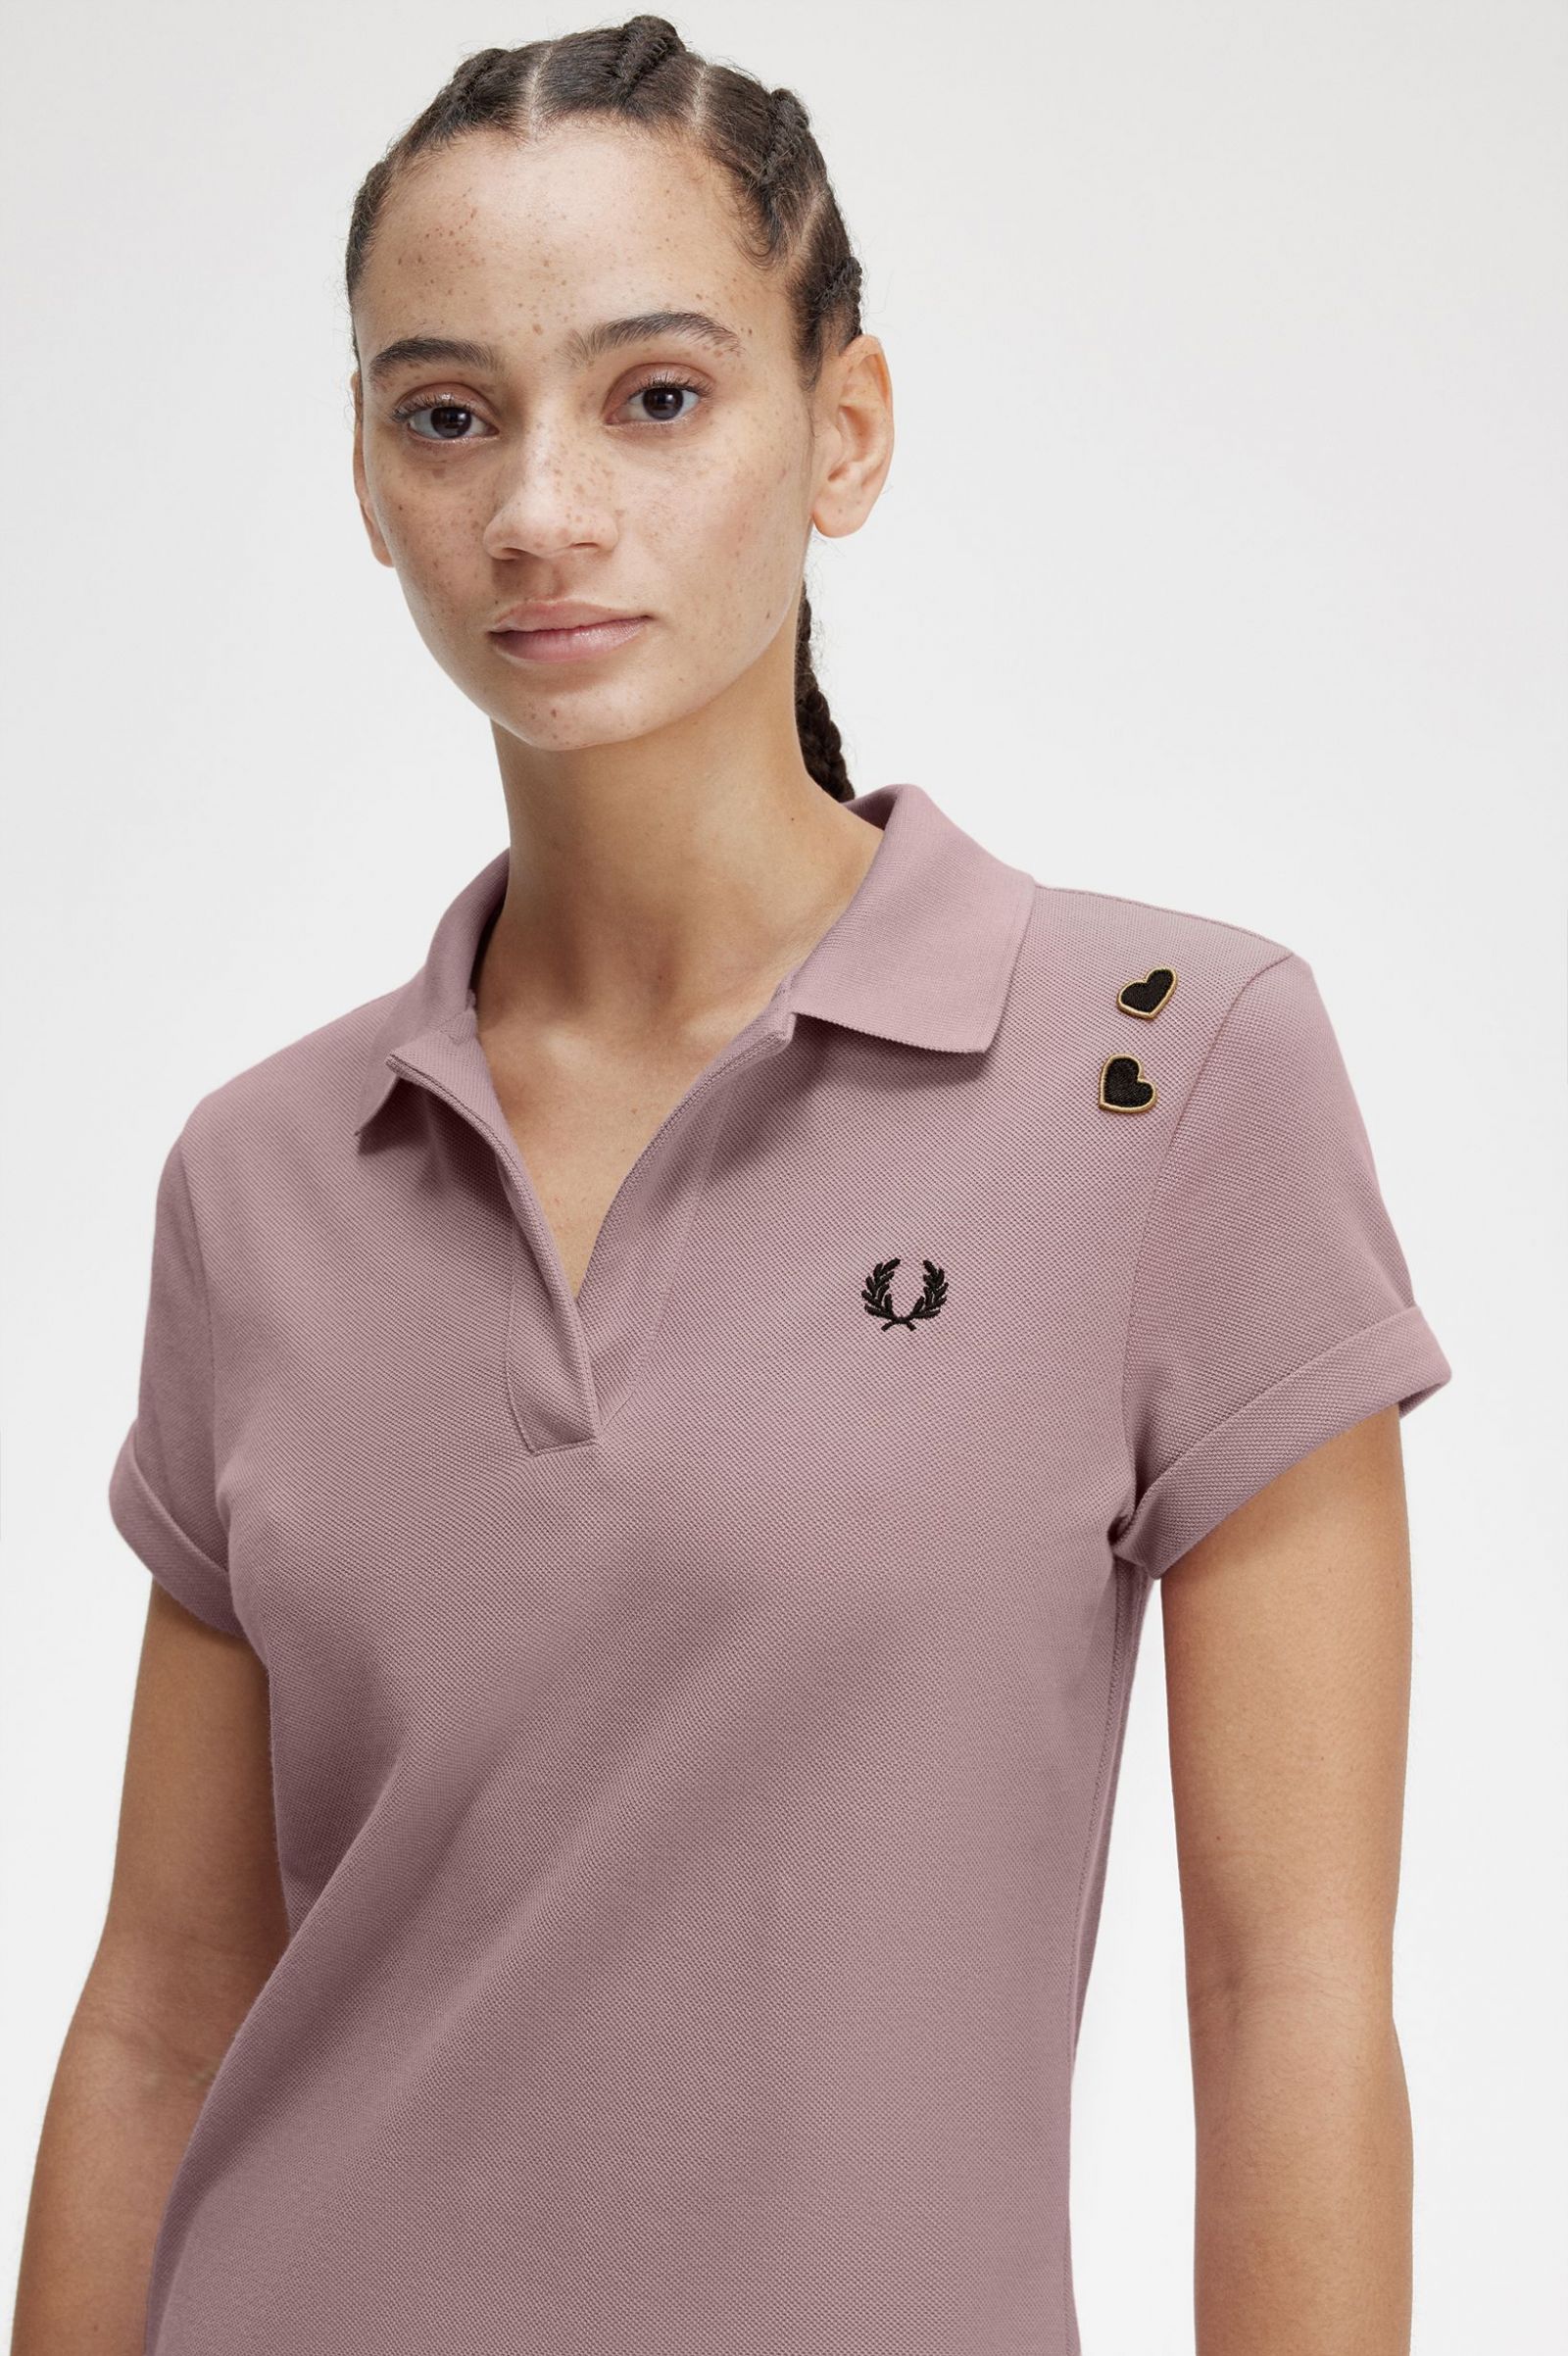 Fred Perry Open Collar Pique Shirt in Dusty Rose Pink